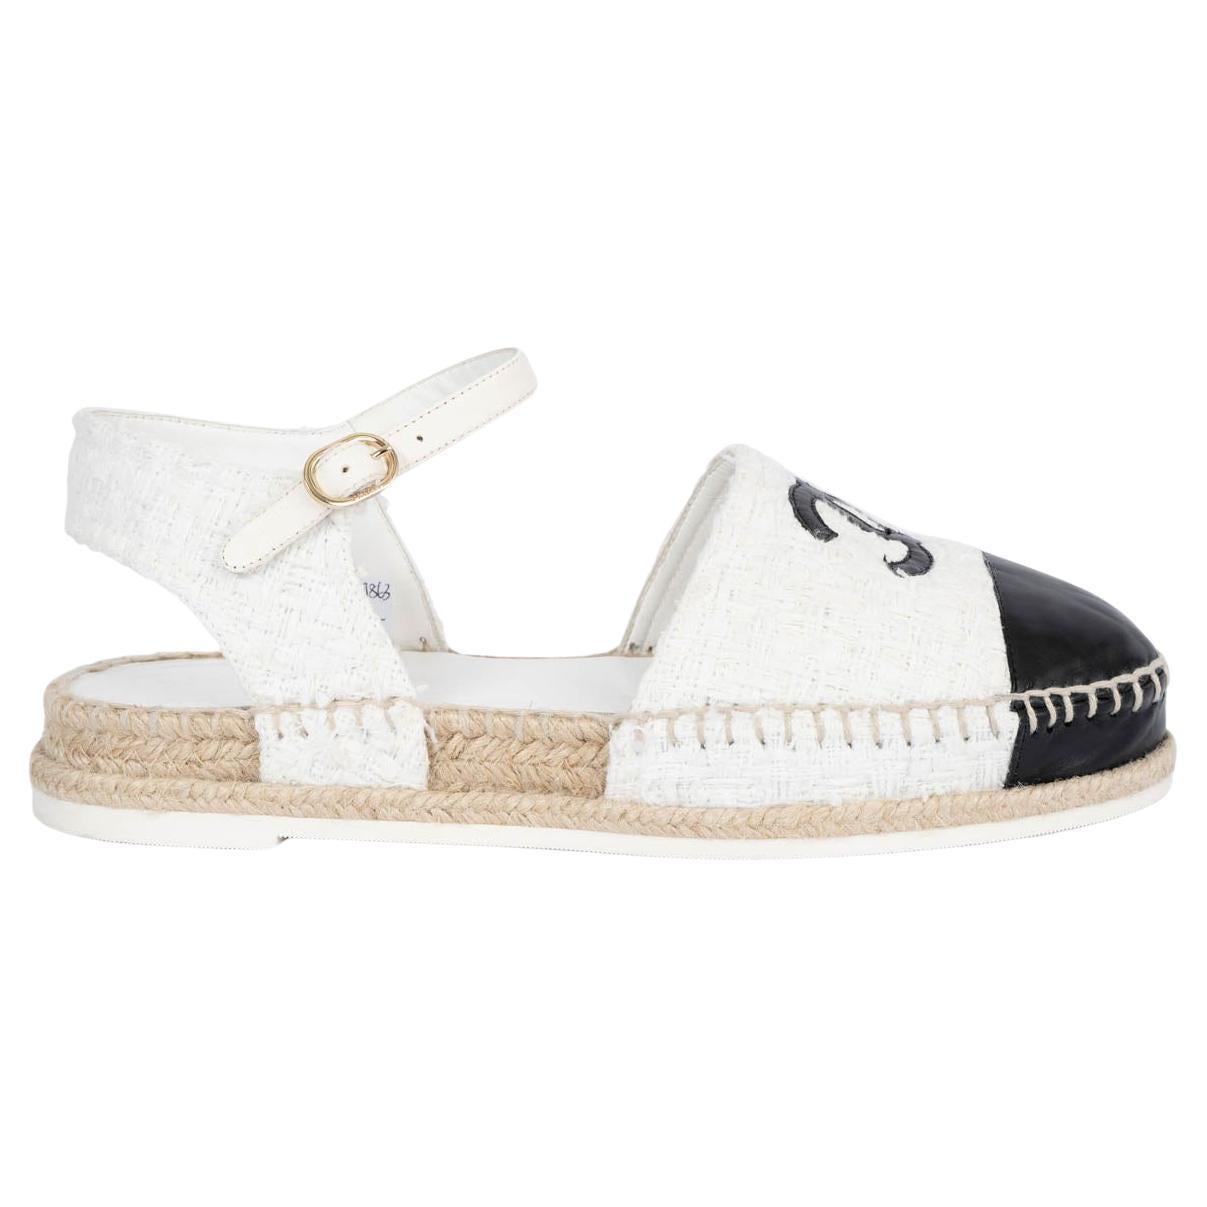 CHANEL white 2020 20P TWEED ESPADRILLES Shoes 39 For Sale